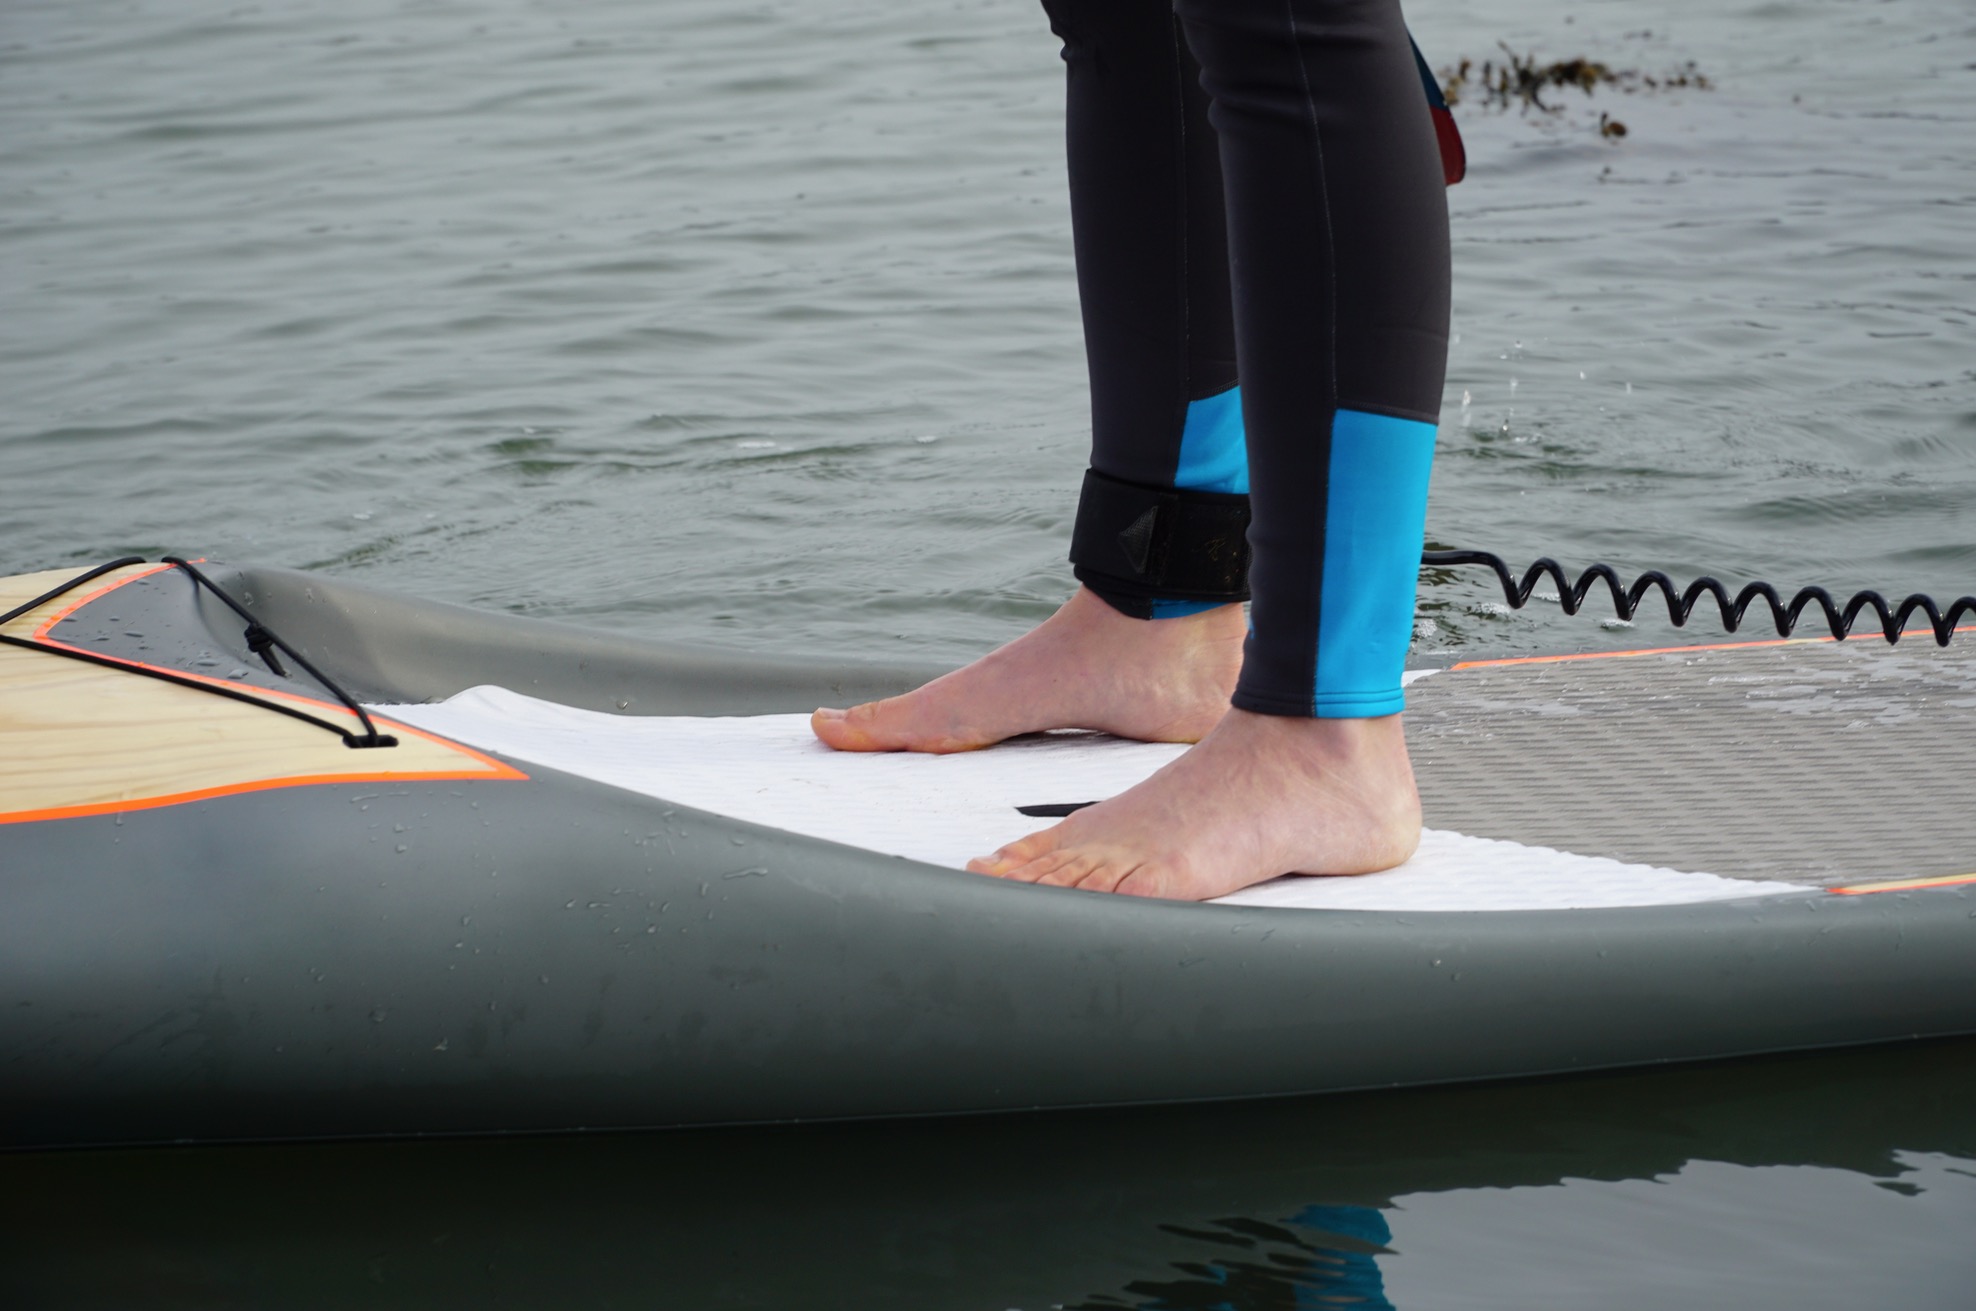 What to wear on your feet paddleboarding? - bare feet